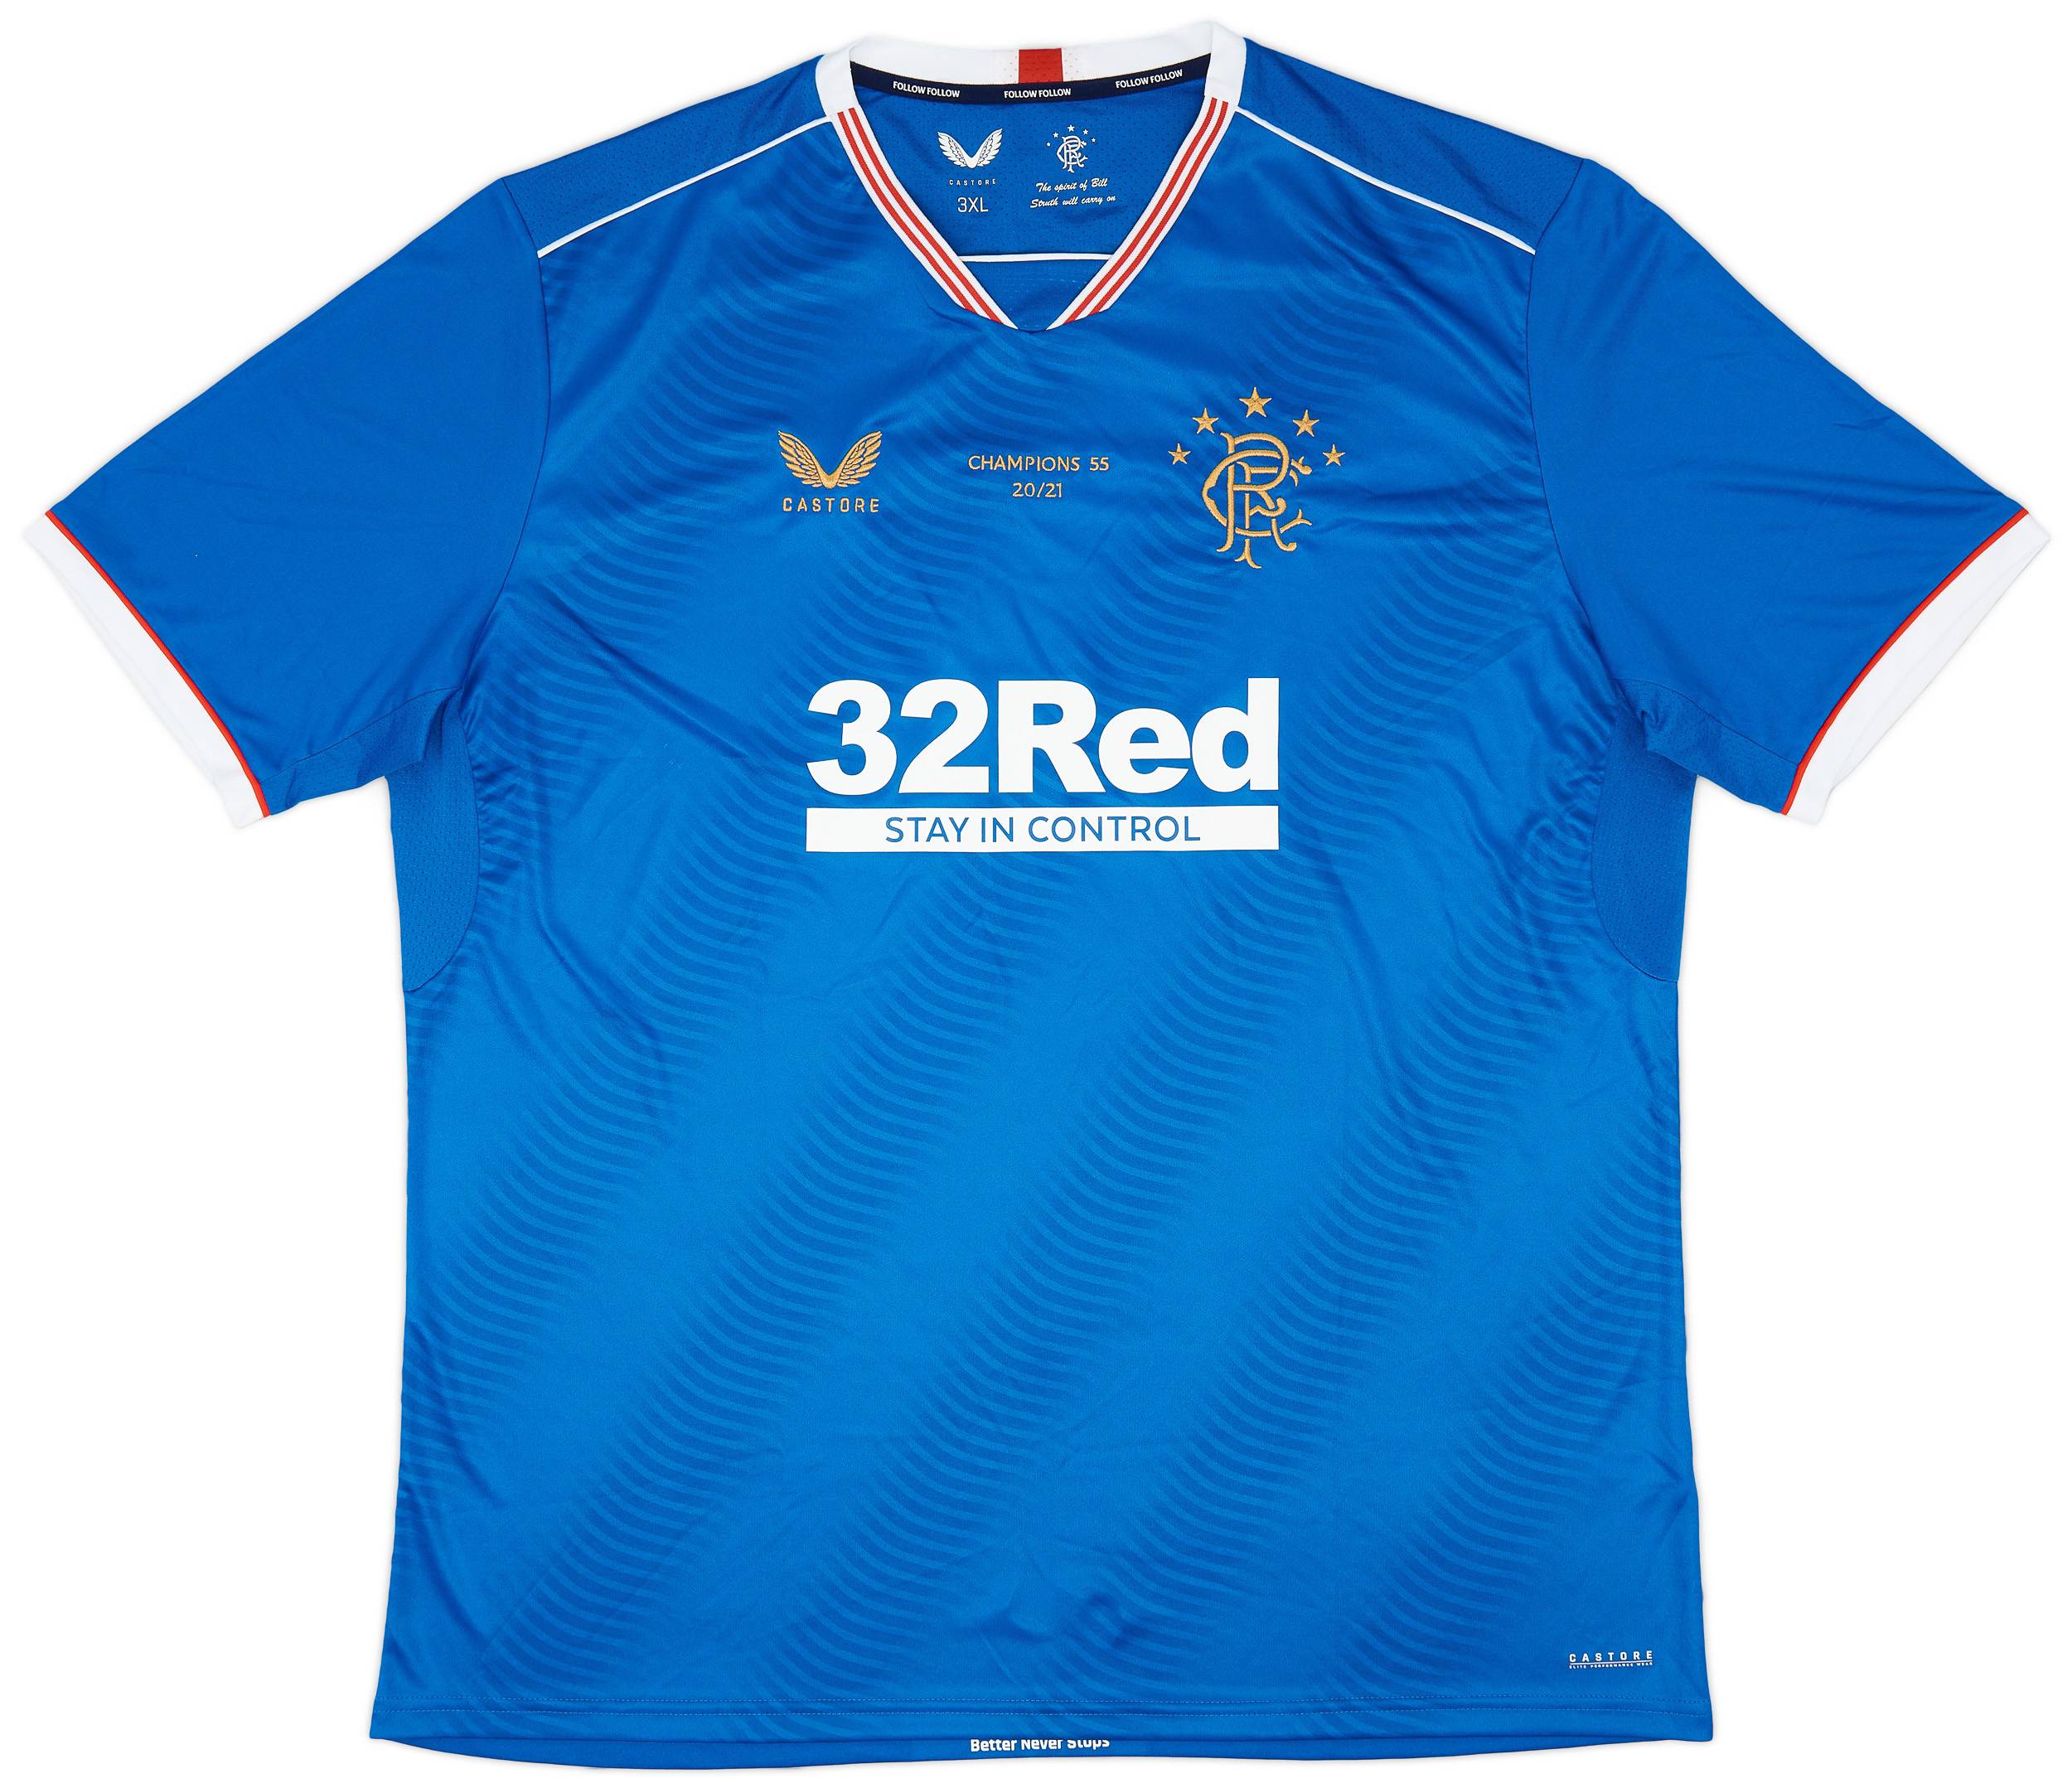 2020-21 Rangers Special Edition 'Champions 55 20/21' Home Shirt - 8/10 - (3XL)